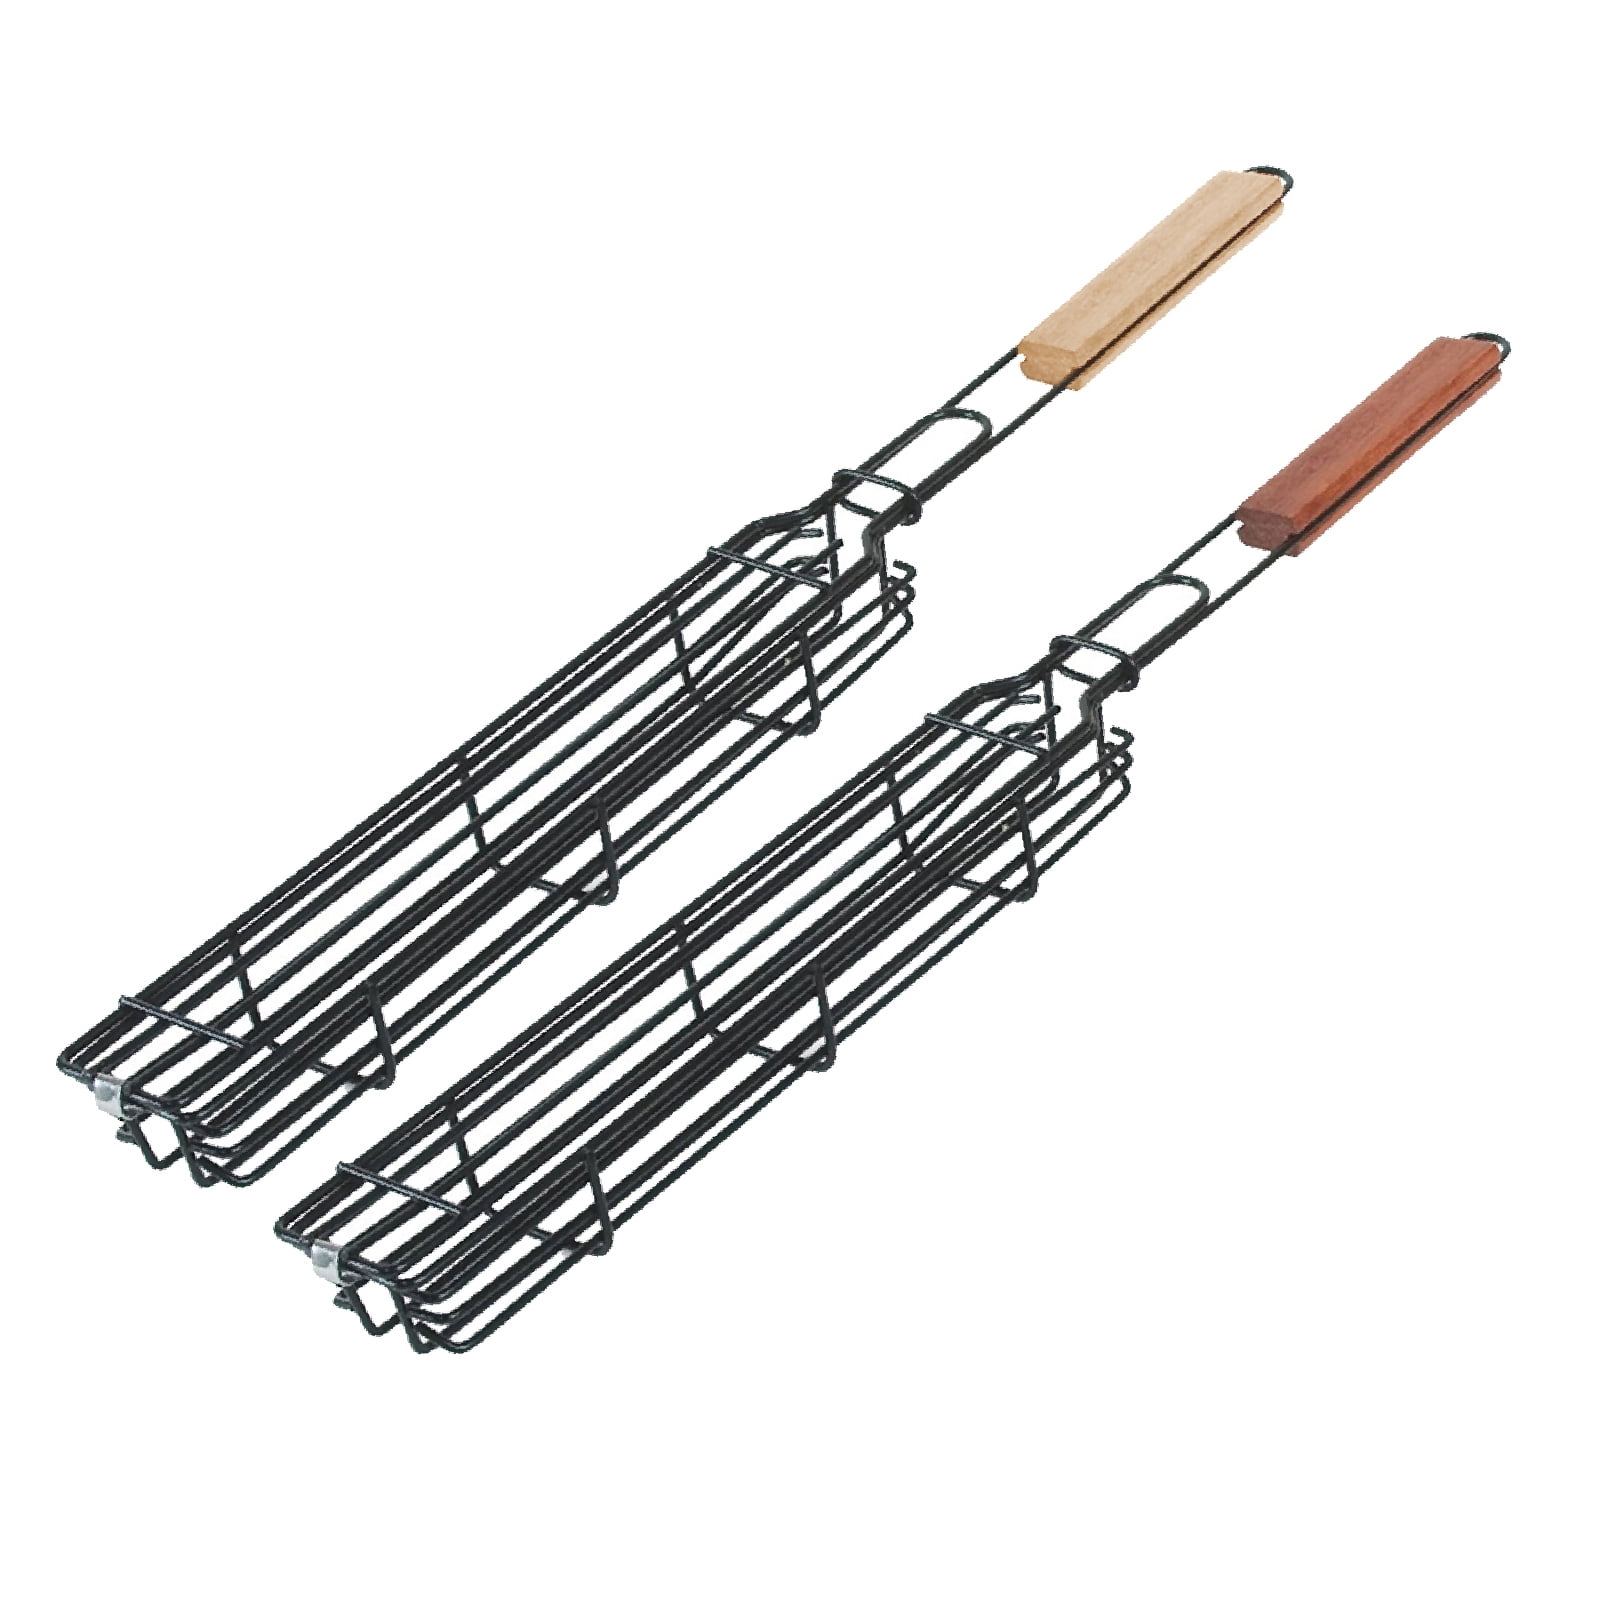 Charcoal Companion Nonstick Kabab Grilling Baskets buy 3 and get 1 free 